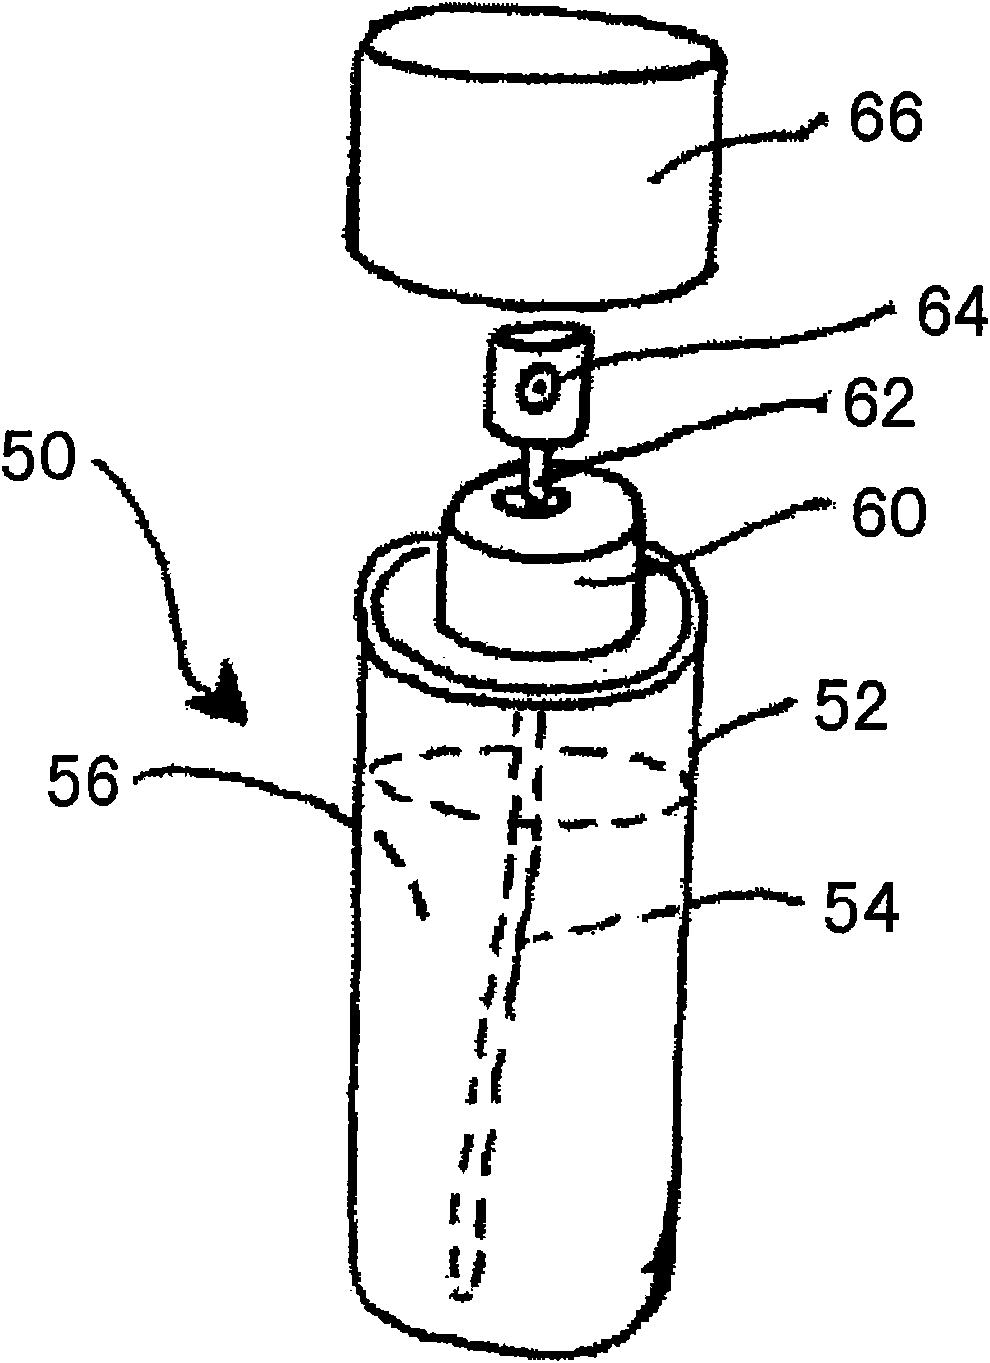 Pest control compositions, and methods and products utilizing same